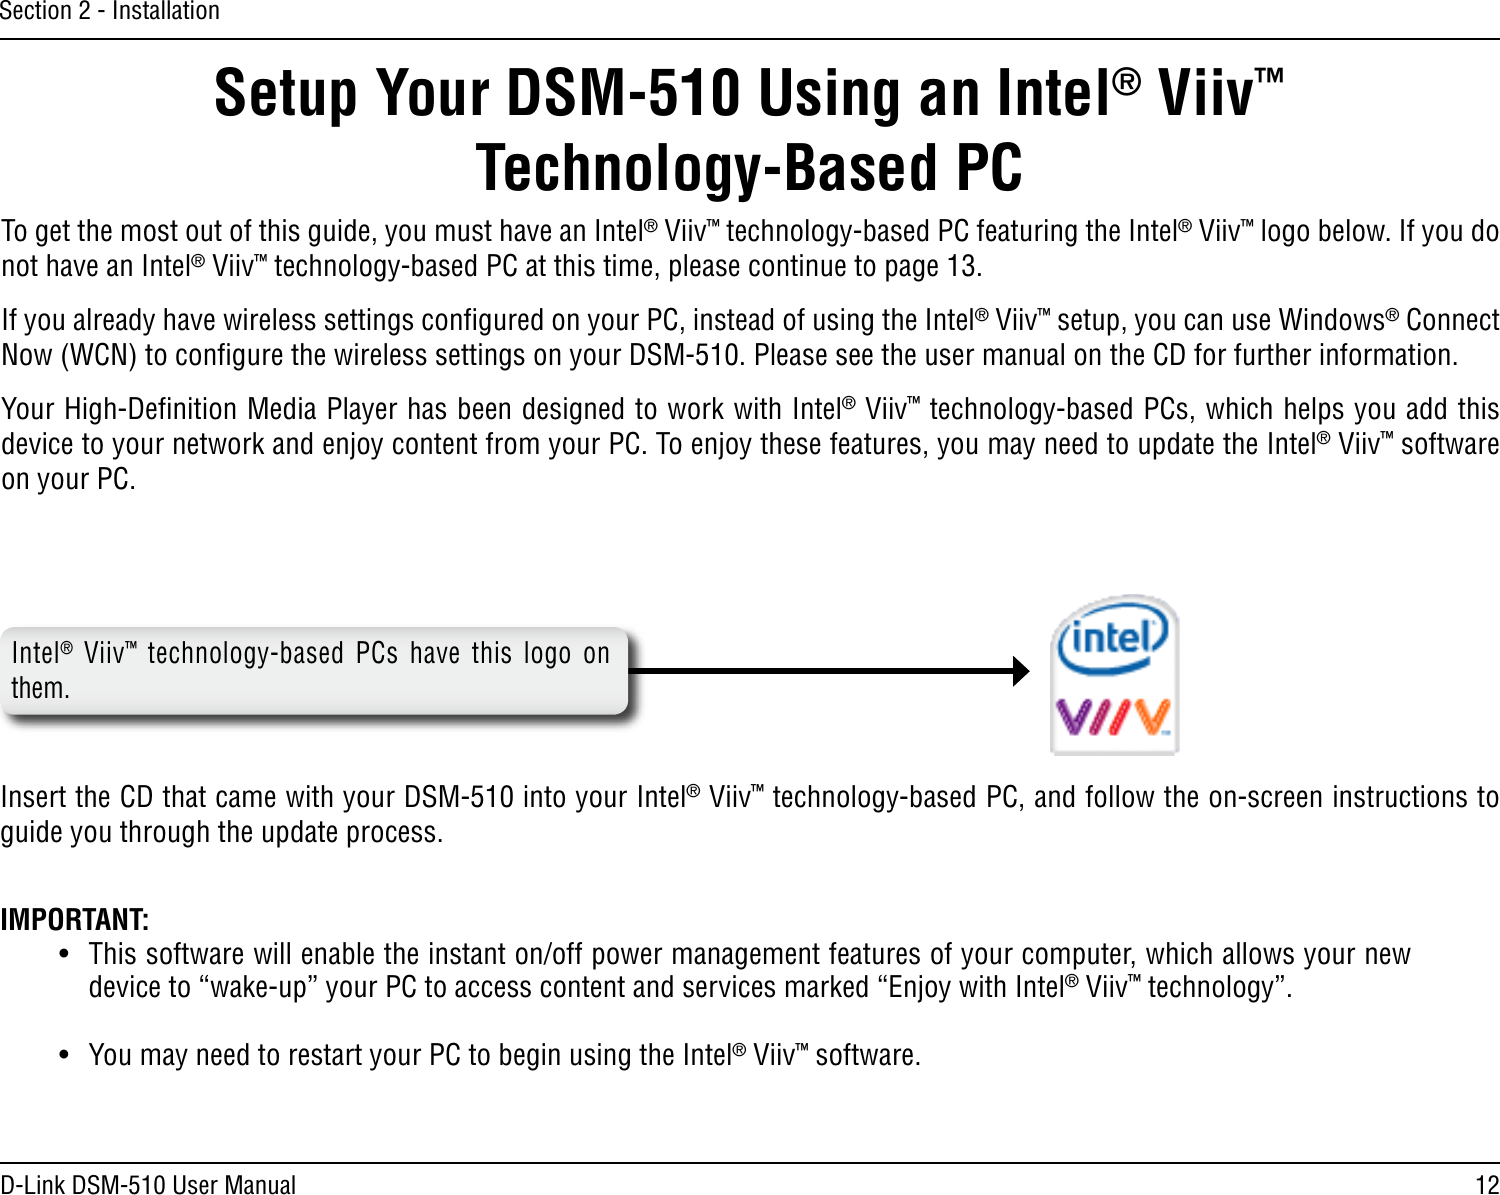 12D-Link DSM-510 User ManualSection 2 - InstallationIntel®  Viiv™  technology-based  PCs  have  this  logo  on them. Setup Your DSM-510 Using an Intel® Viiv™  Technology-Based PCTo get the most out of this guide, you must have an Intel® Viiv™ technology-based PC featuring the Intel® Viiv™ logo below. If you do not have an Intel® Viiv™ technology-based PC at this time, please continue to page 13.If you already have wireless settings conﬁgured on your PC, instead of using the Intel® Viiv™ setup, you can use Windows® Connect Now (WCN) to conﬁgure the wireless settings on your DSM-510. Please see the user manual on the CD for further information.Your High-Deﬁnition Media Player has been designed to work with Intel® Viiv™ technology-based PCs, which helps you add this device to your network and enjoy content from your PC. To enjoy these features, you may need to update the Intel® Viiv™ software on your PC. Insert the CD that came with your DSM-510 into your Intel® Viiv™ technology-based PC, and follow the on-screen instructions to guide you through the update process.IMPORTANT: •  This software will enable the instant on/off power management features of your computer, which allows your new device to “wake-up” your PC to access content and services marked “Enjoy with Intel® Viiv™ technology”.•  You may need to restart your PC to begin using the Intel® Viiv™ software.